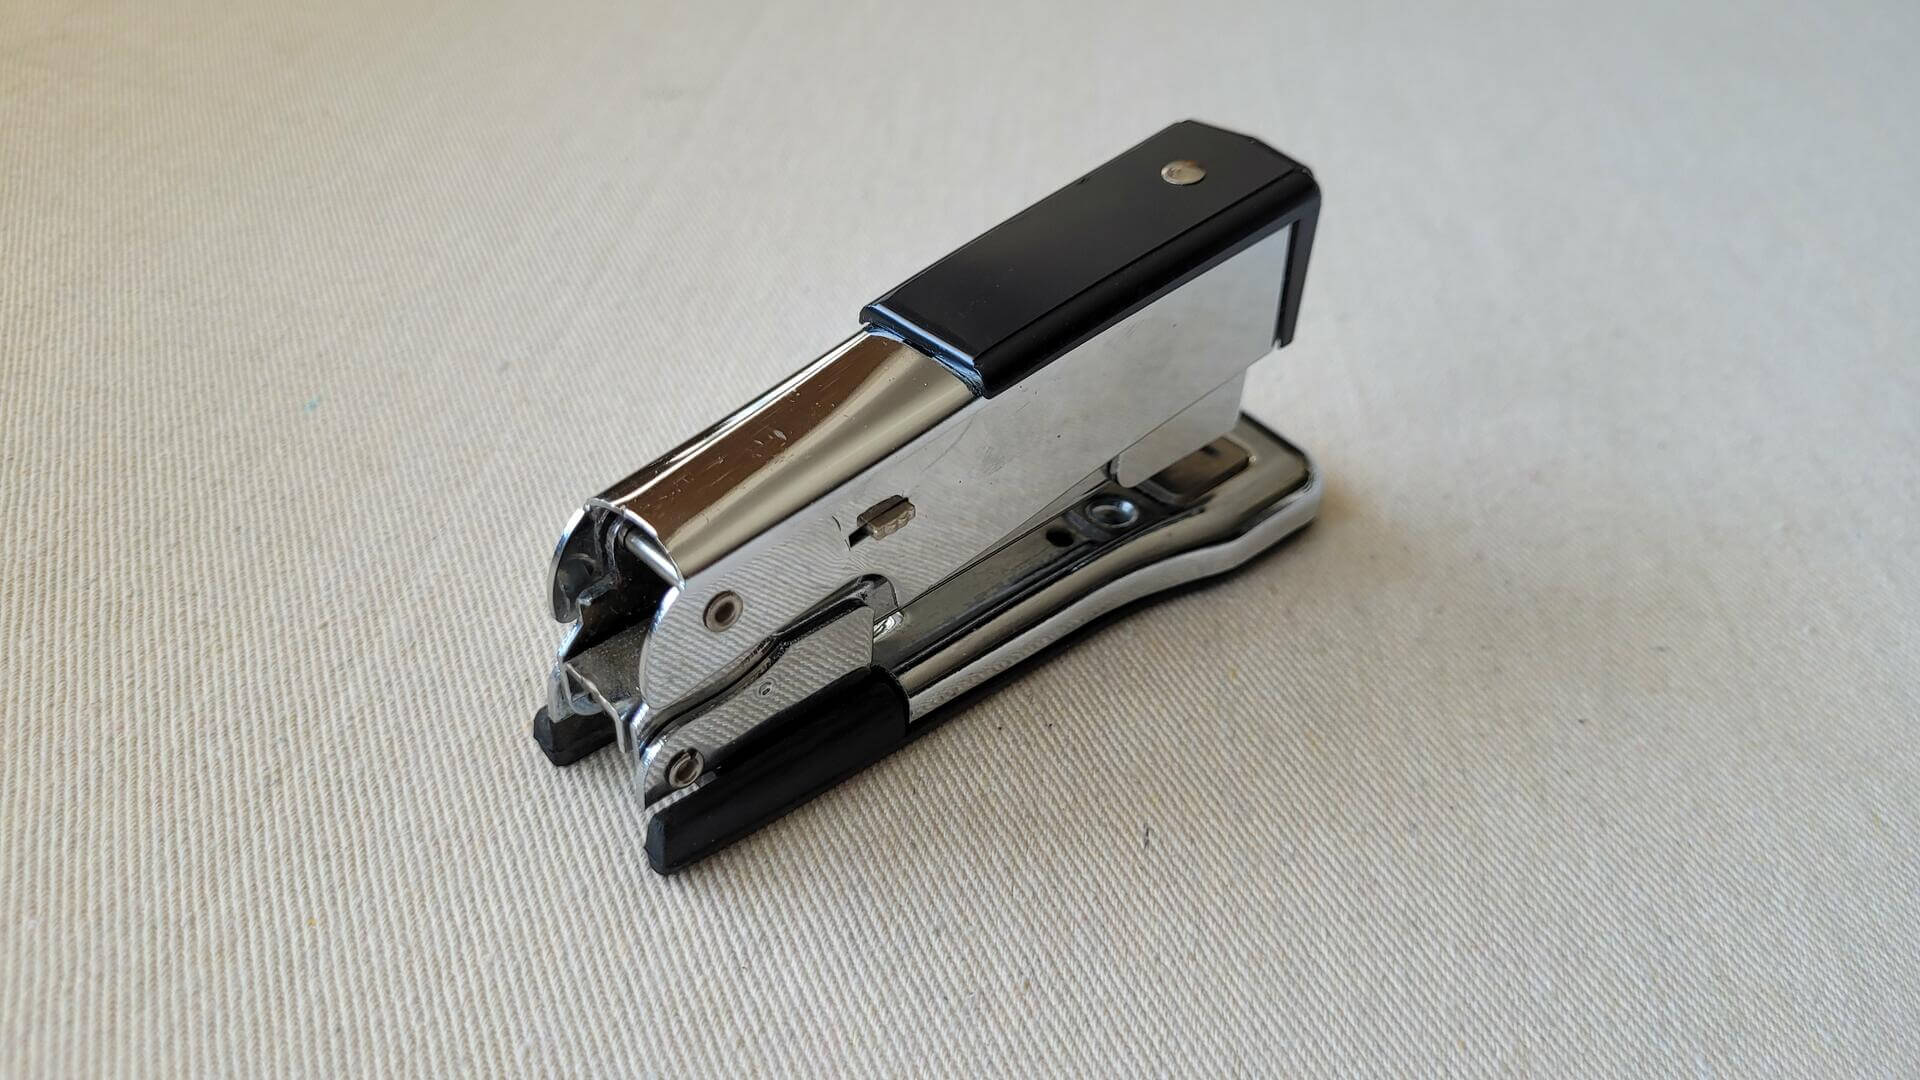 Chrome and black Arrow No 17 stapler by Arrow Fastener Co Inc from Saddle Brook, NJ. Vintage made in USA collectible office equipment and stationery tools